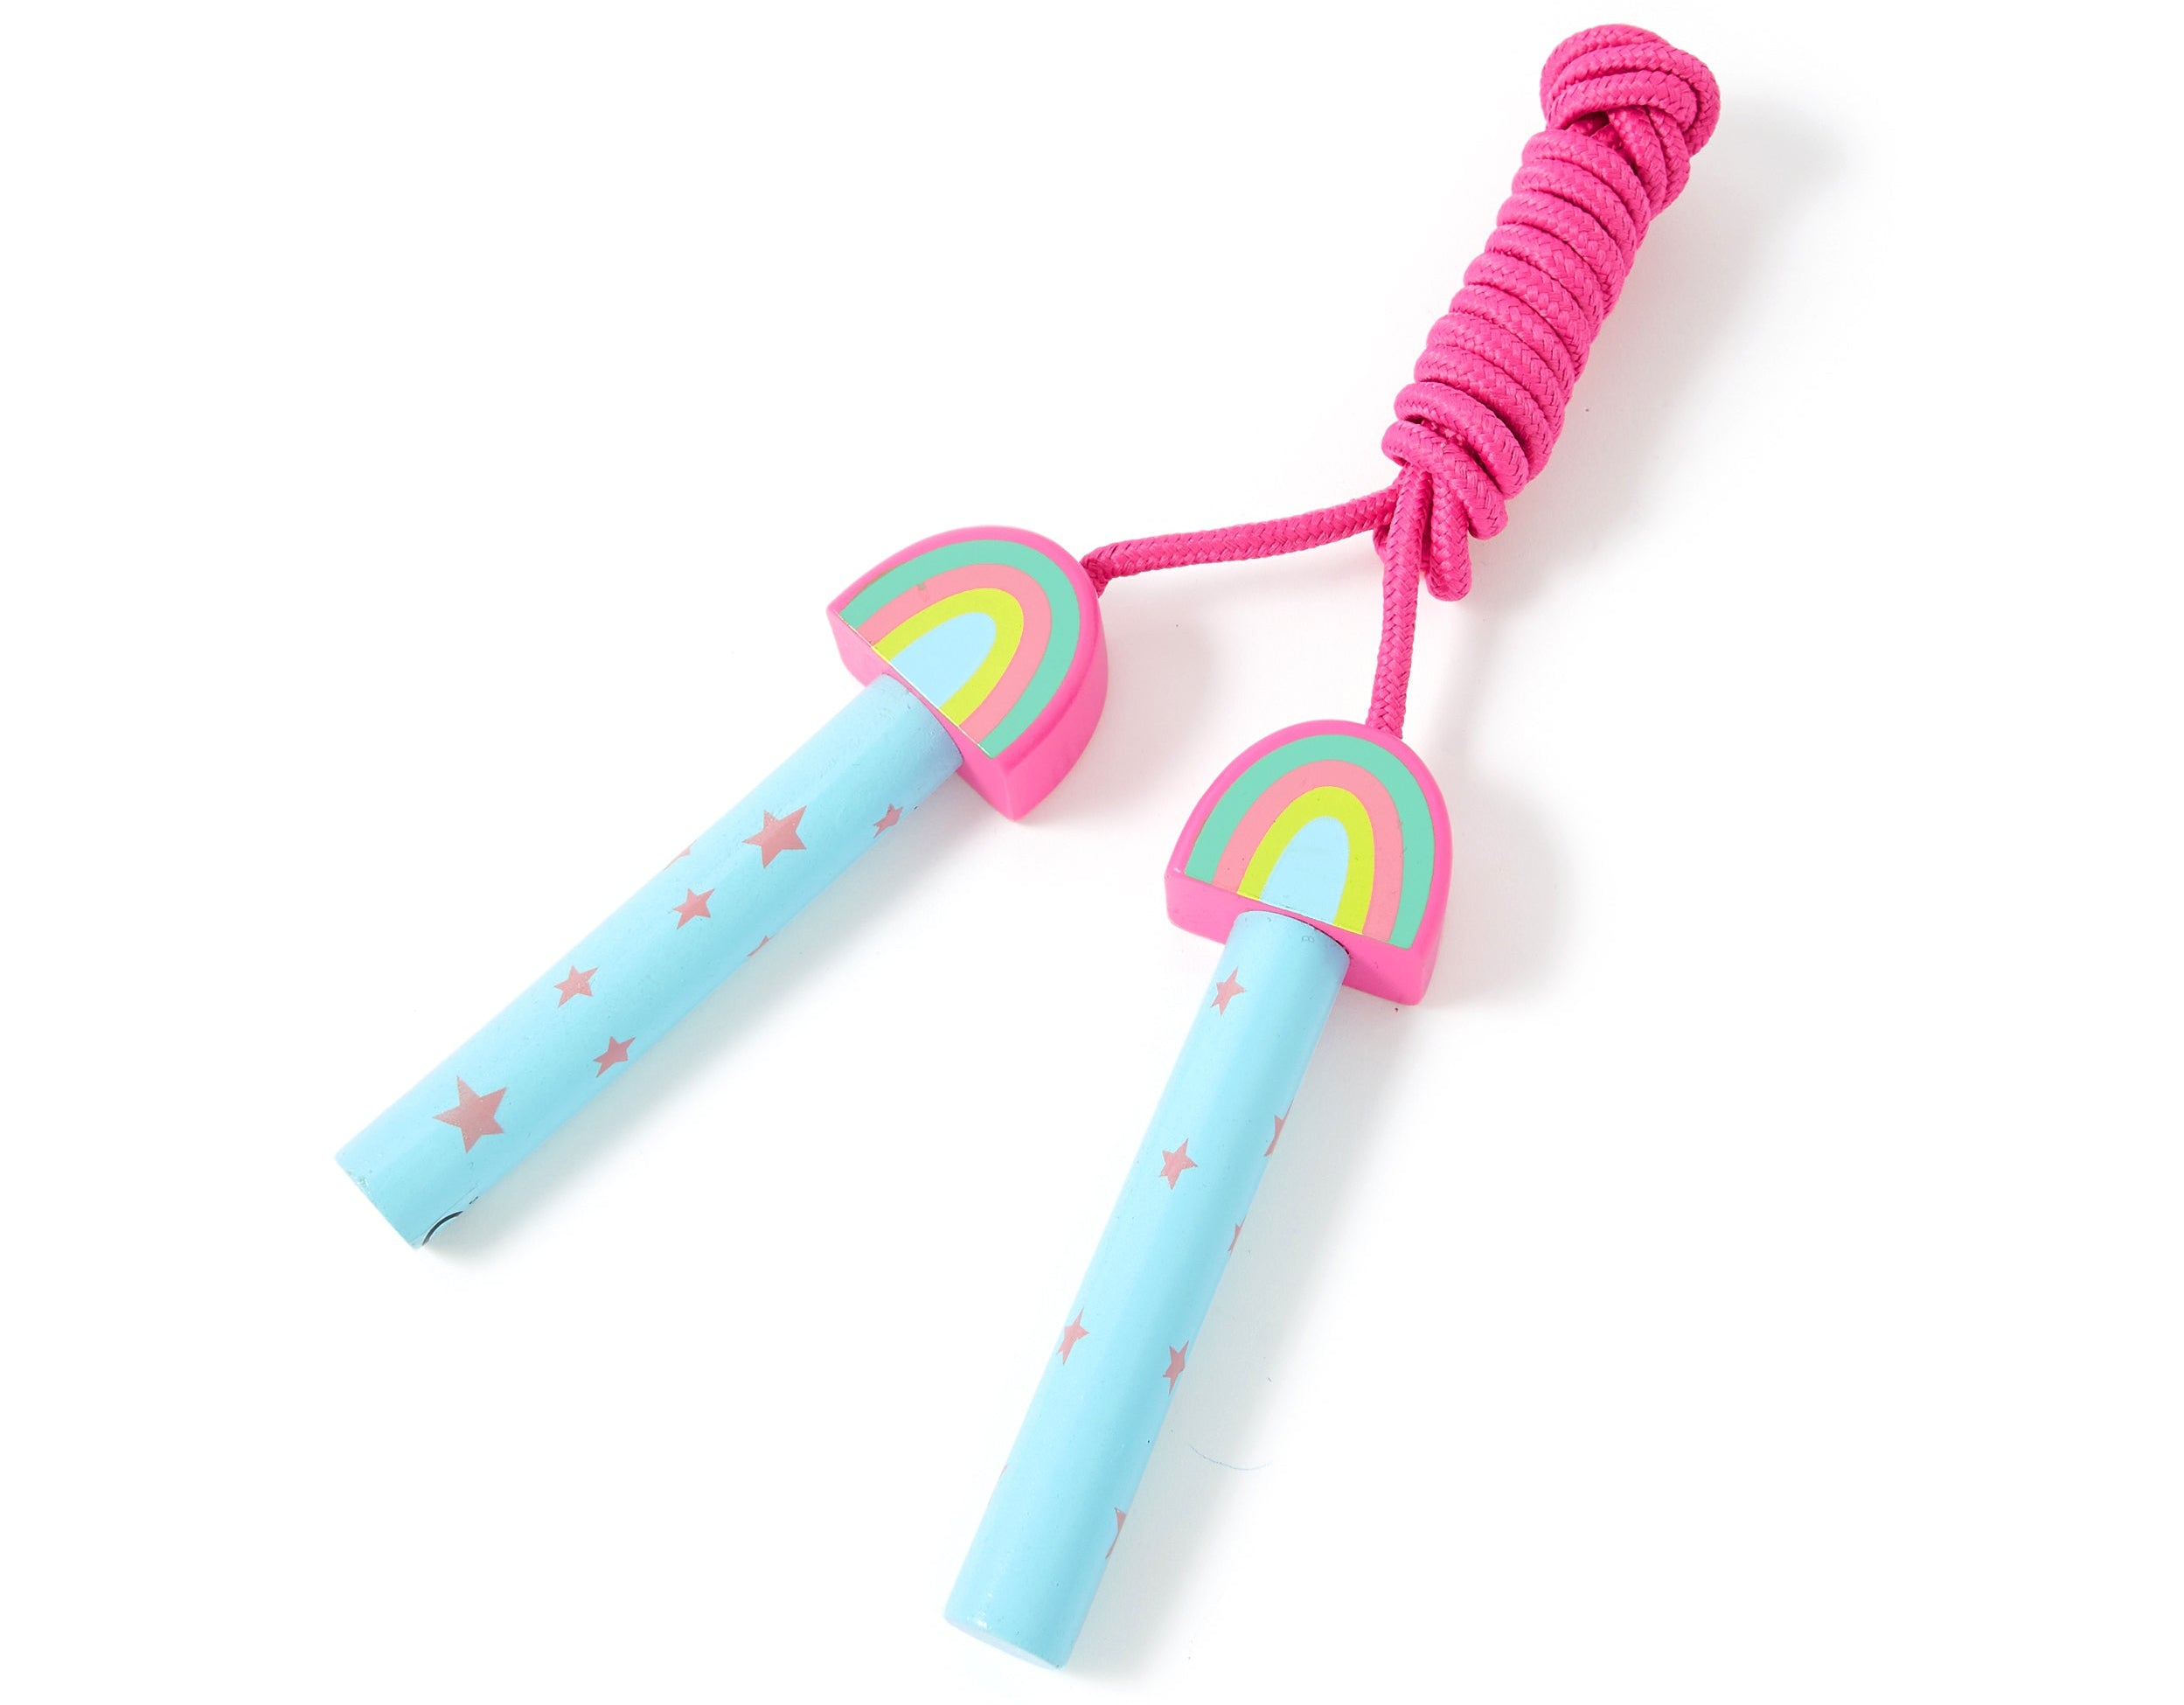 Accessorize London Rainbow Skipping Rope